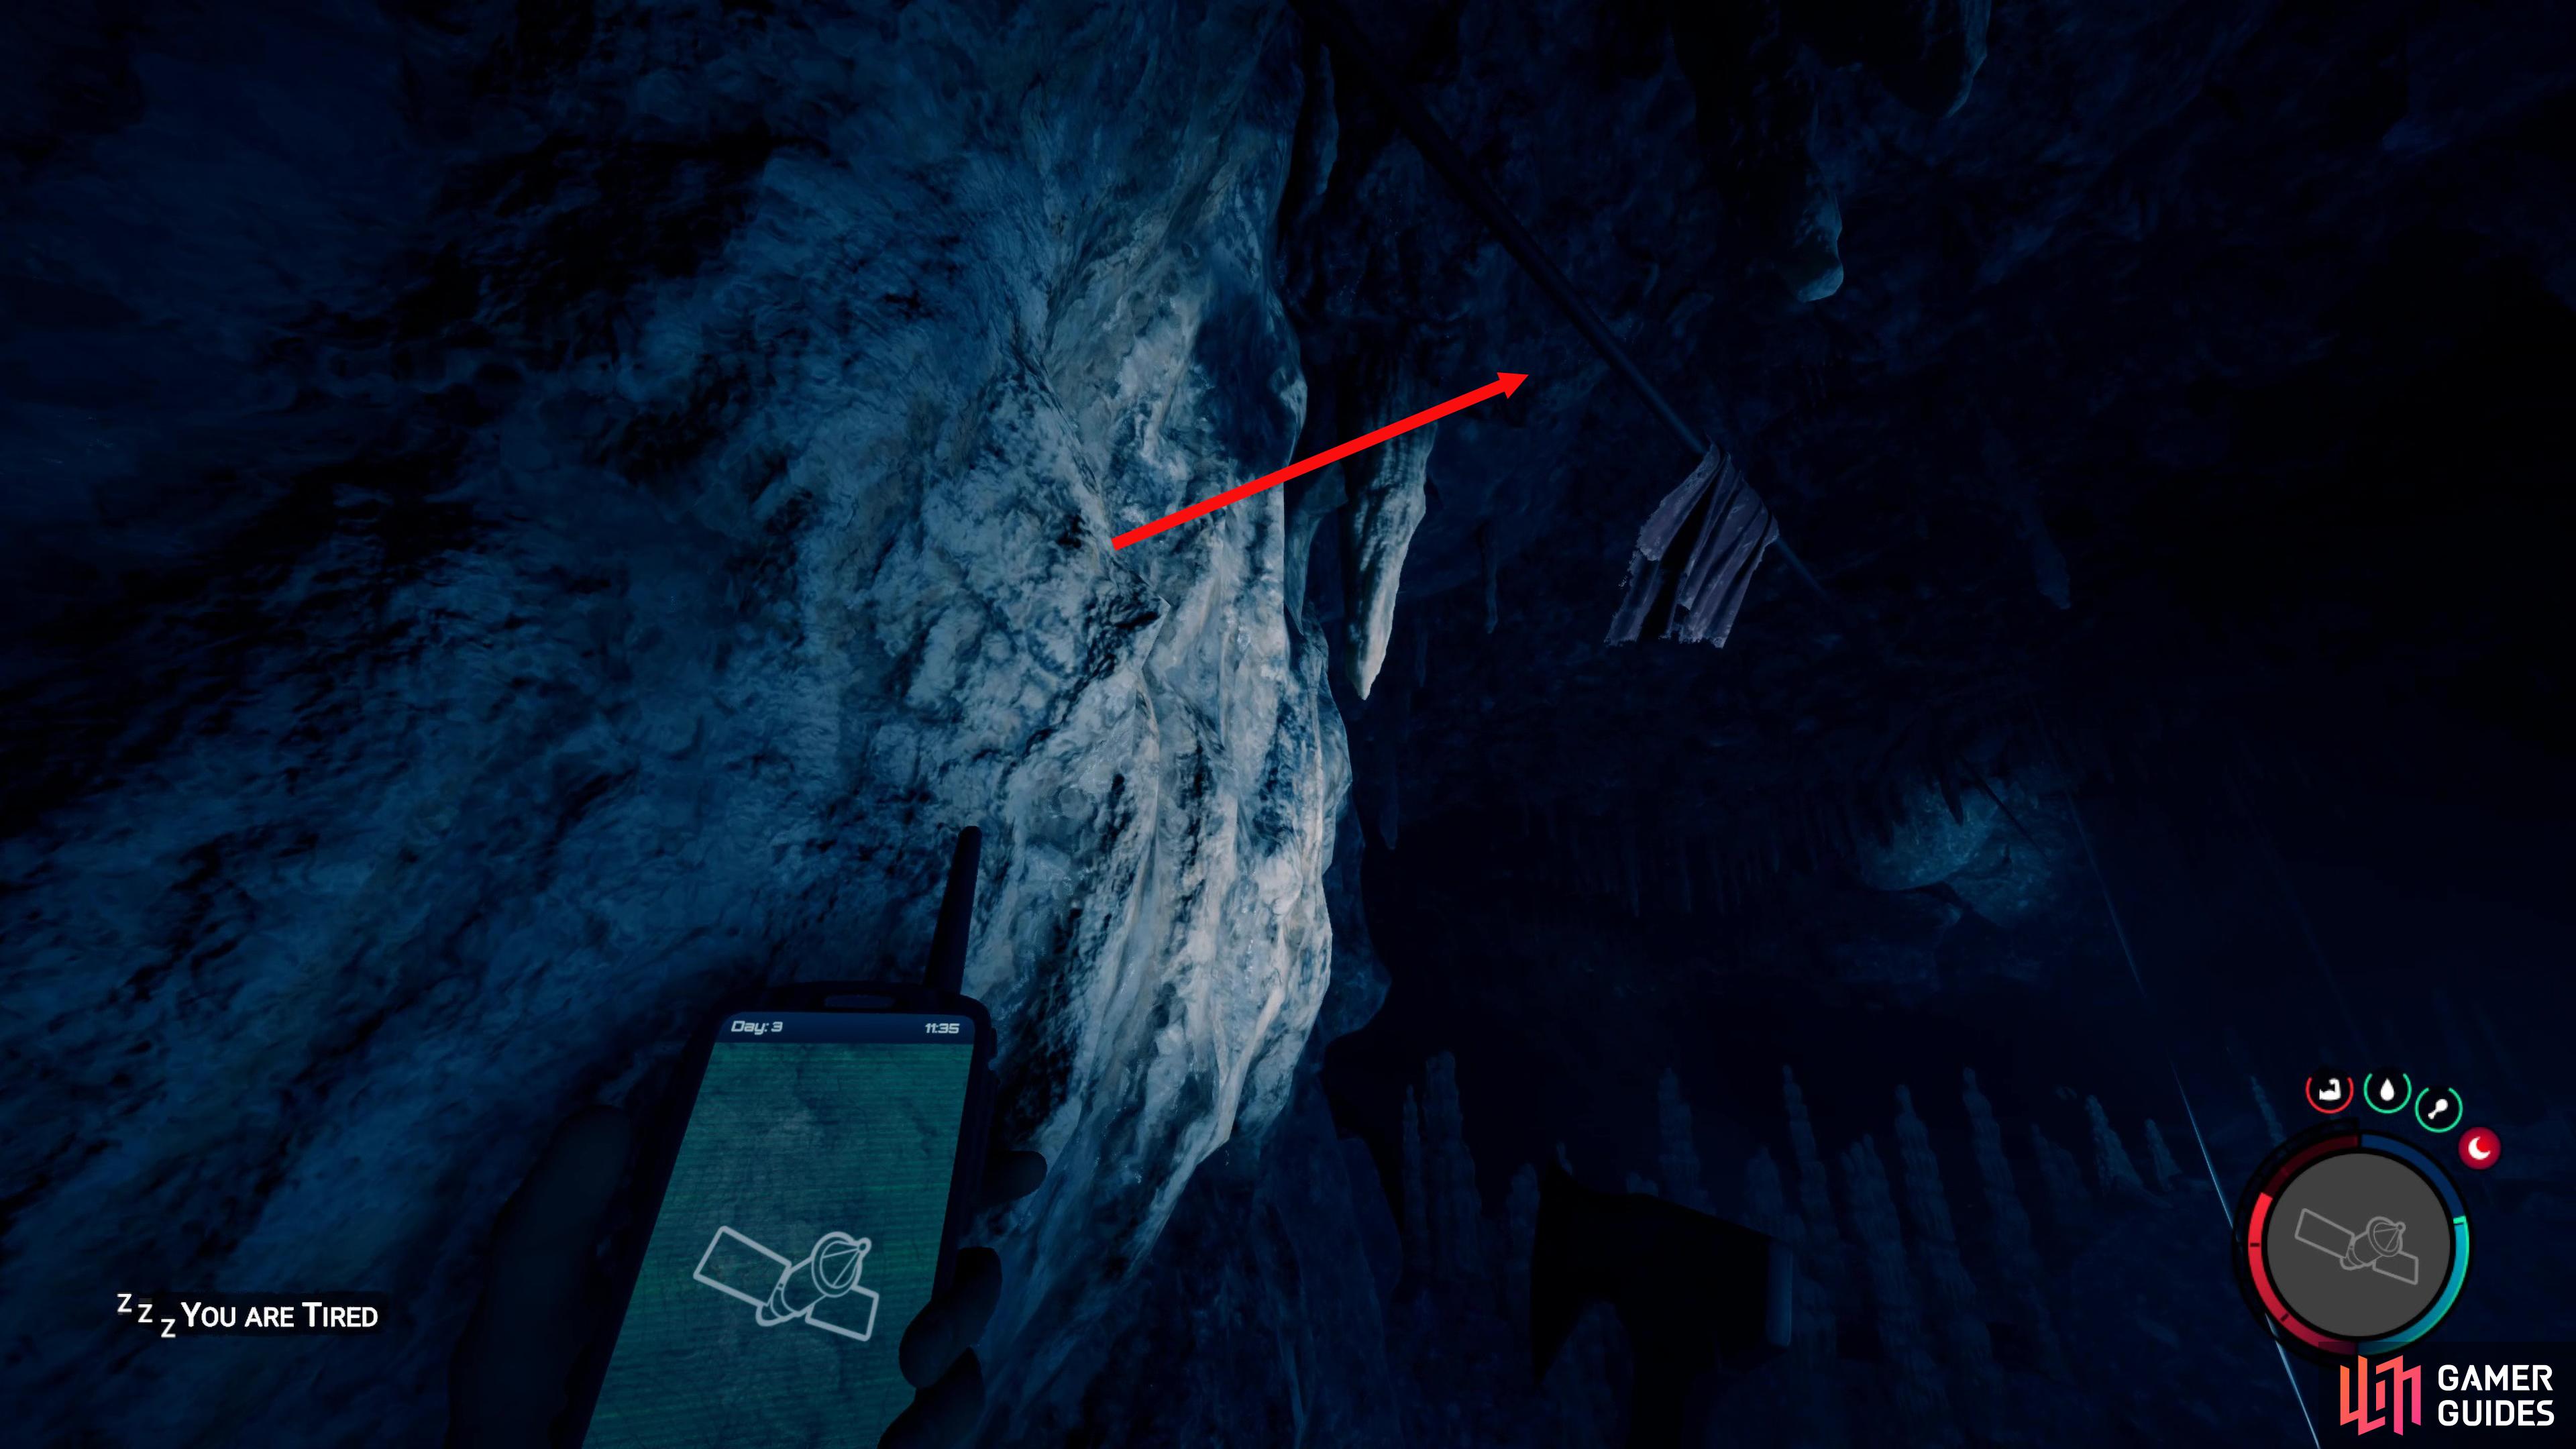 Where to Find a Zipline Gun in Sons of the Forest - The Escapist